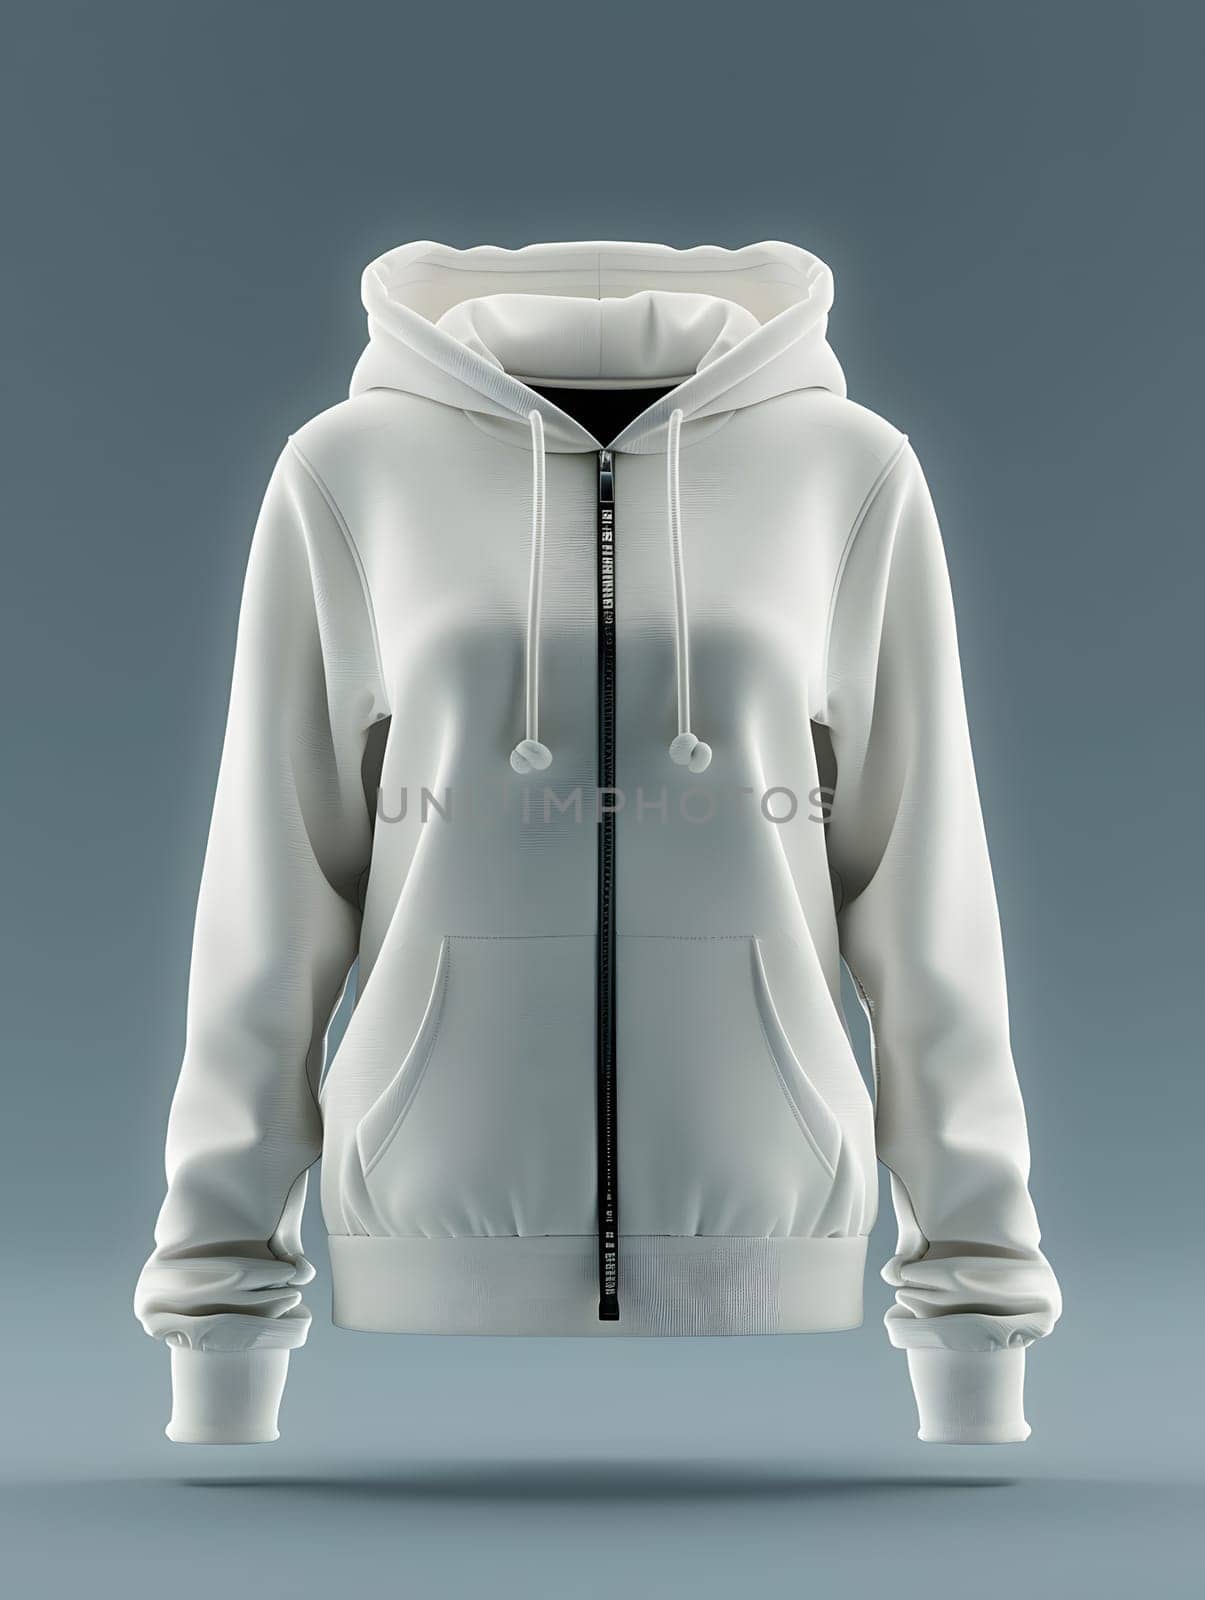 A white hoodie with a zipper, featuring a grey collar and sleeves on an electric blue background. This sportswear piece is perfect for a casual look